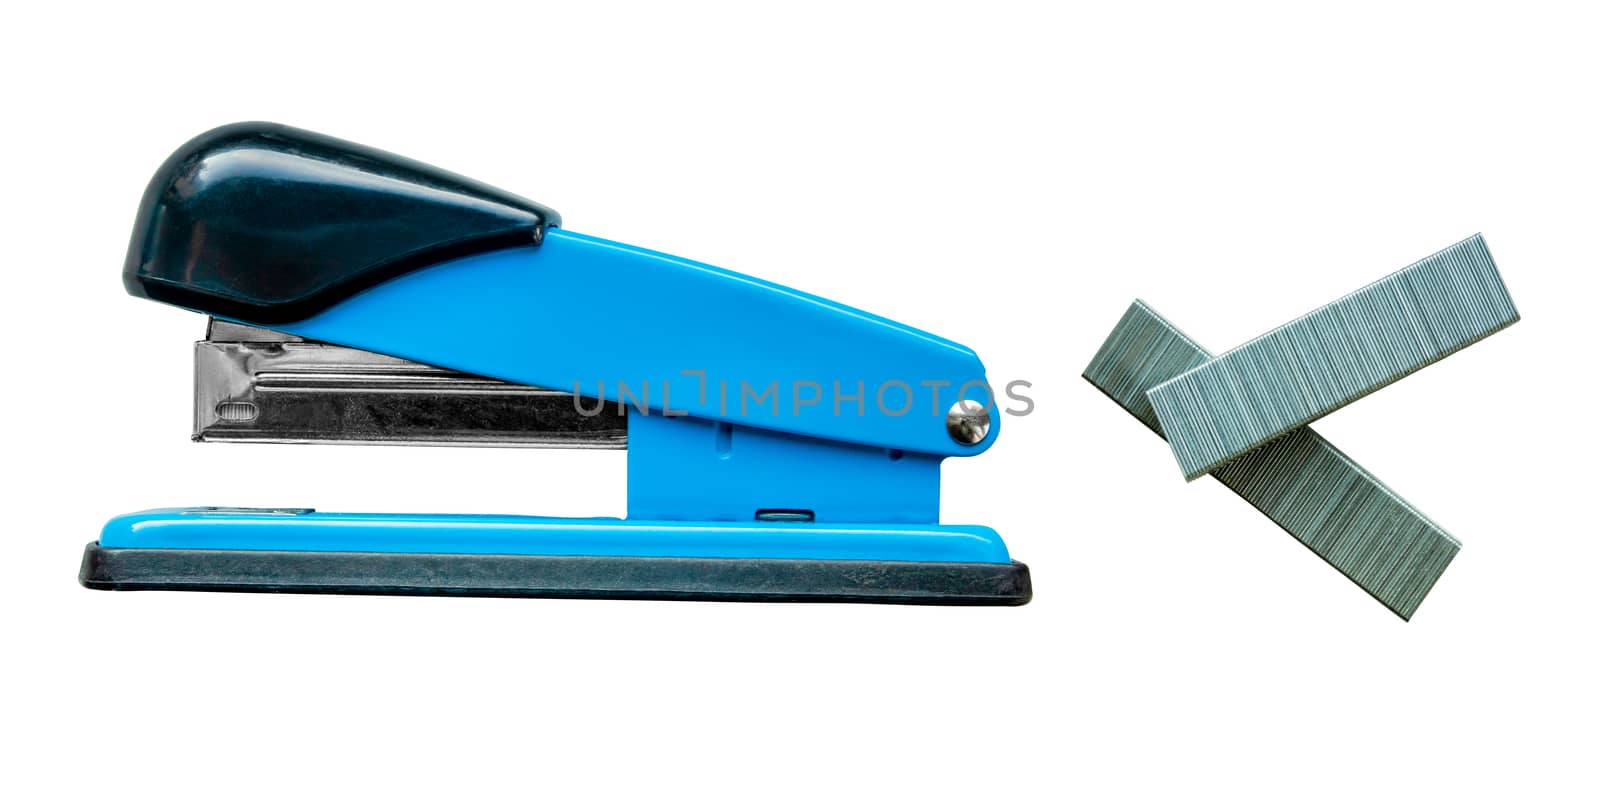 Isolated Stapler And Staples by mrdoomits